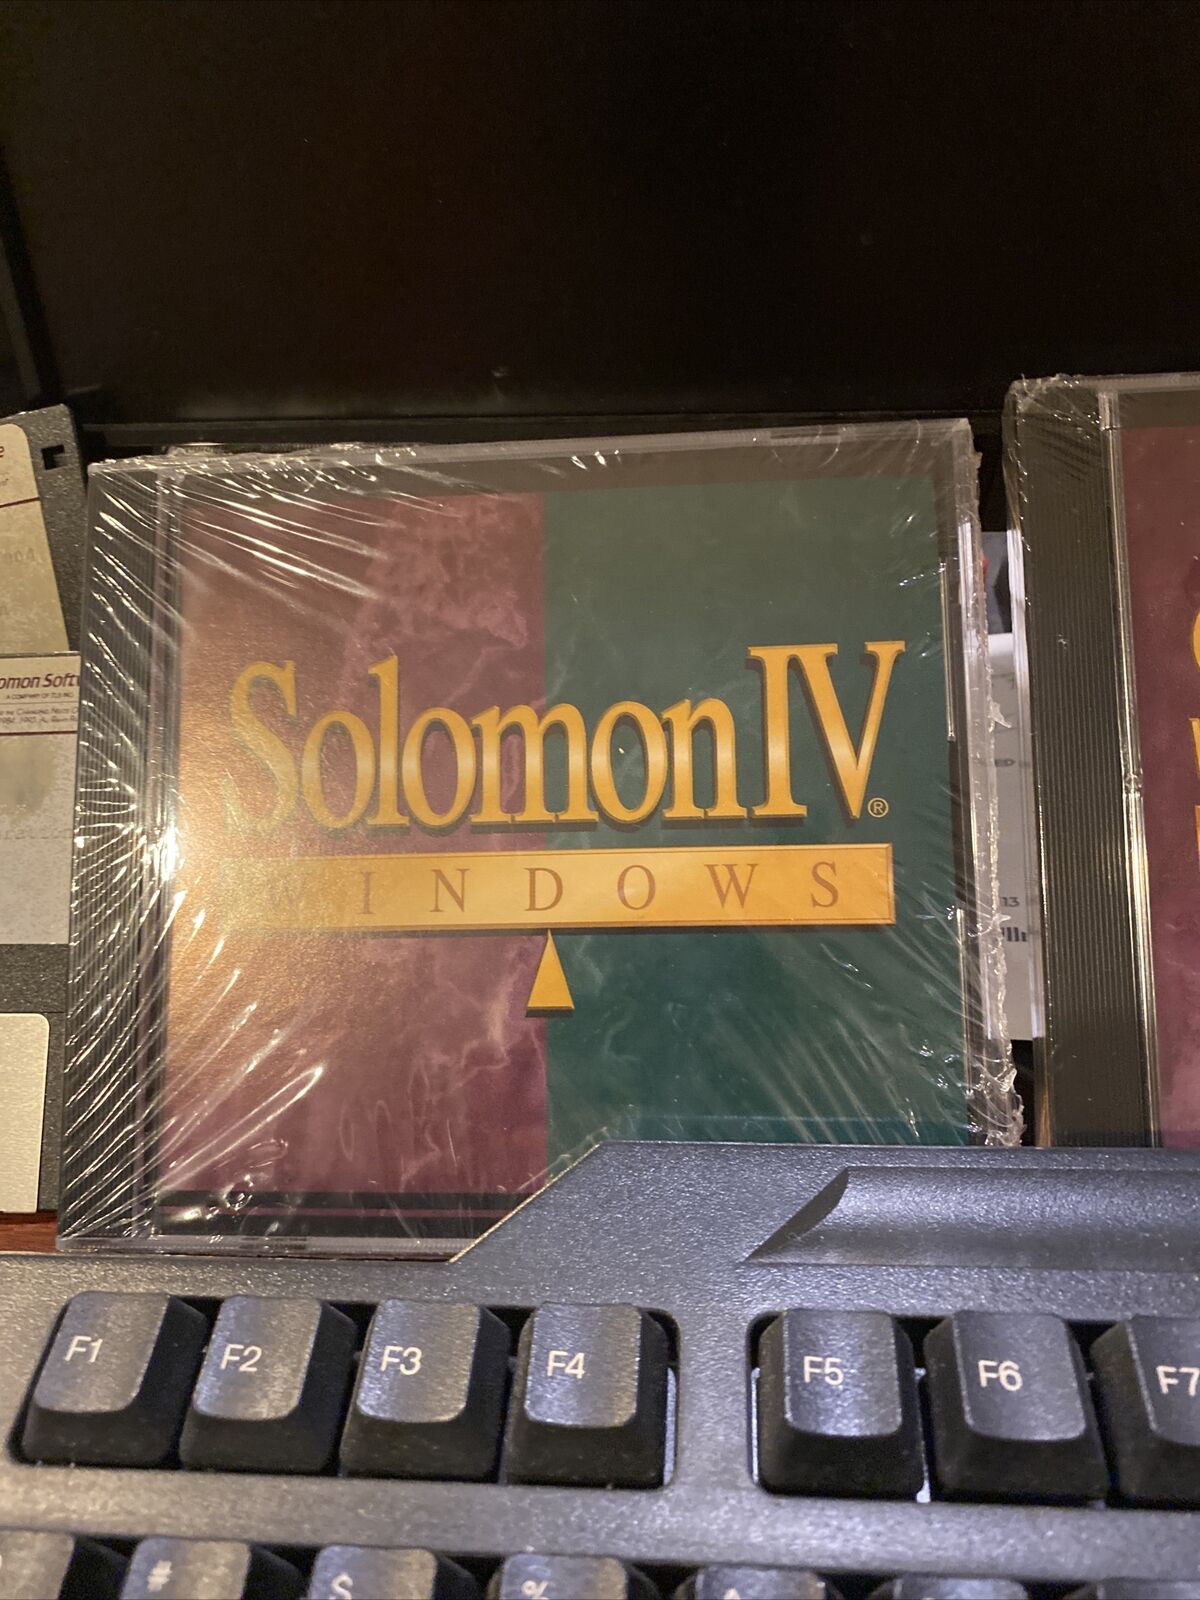 AUTHENTIC RARE BRAND NEW Solomon IV  For Windows. System Evaluation Kit + F&T